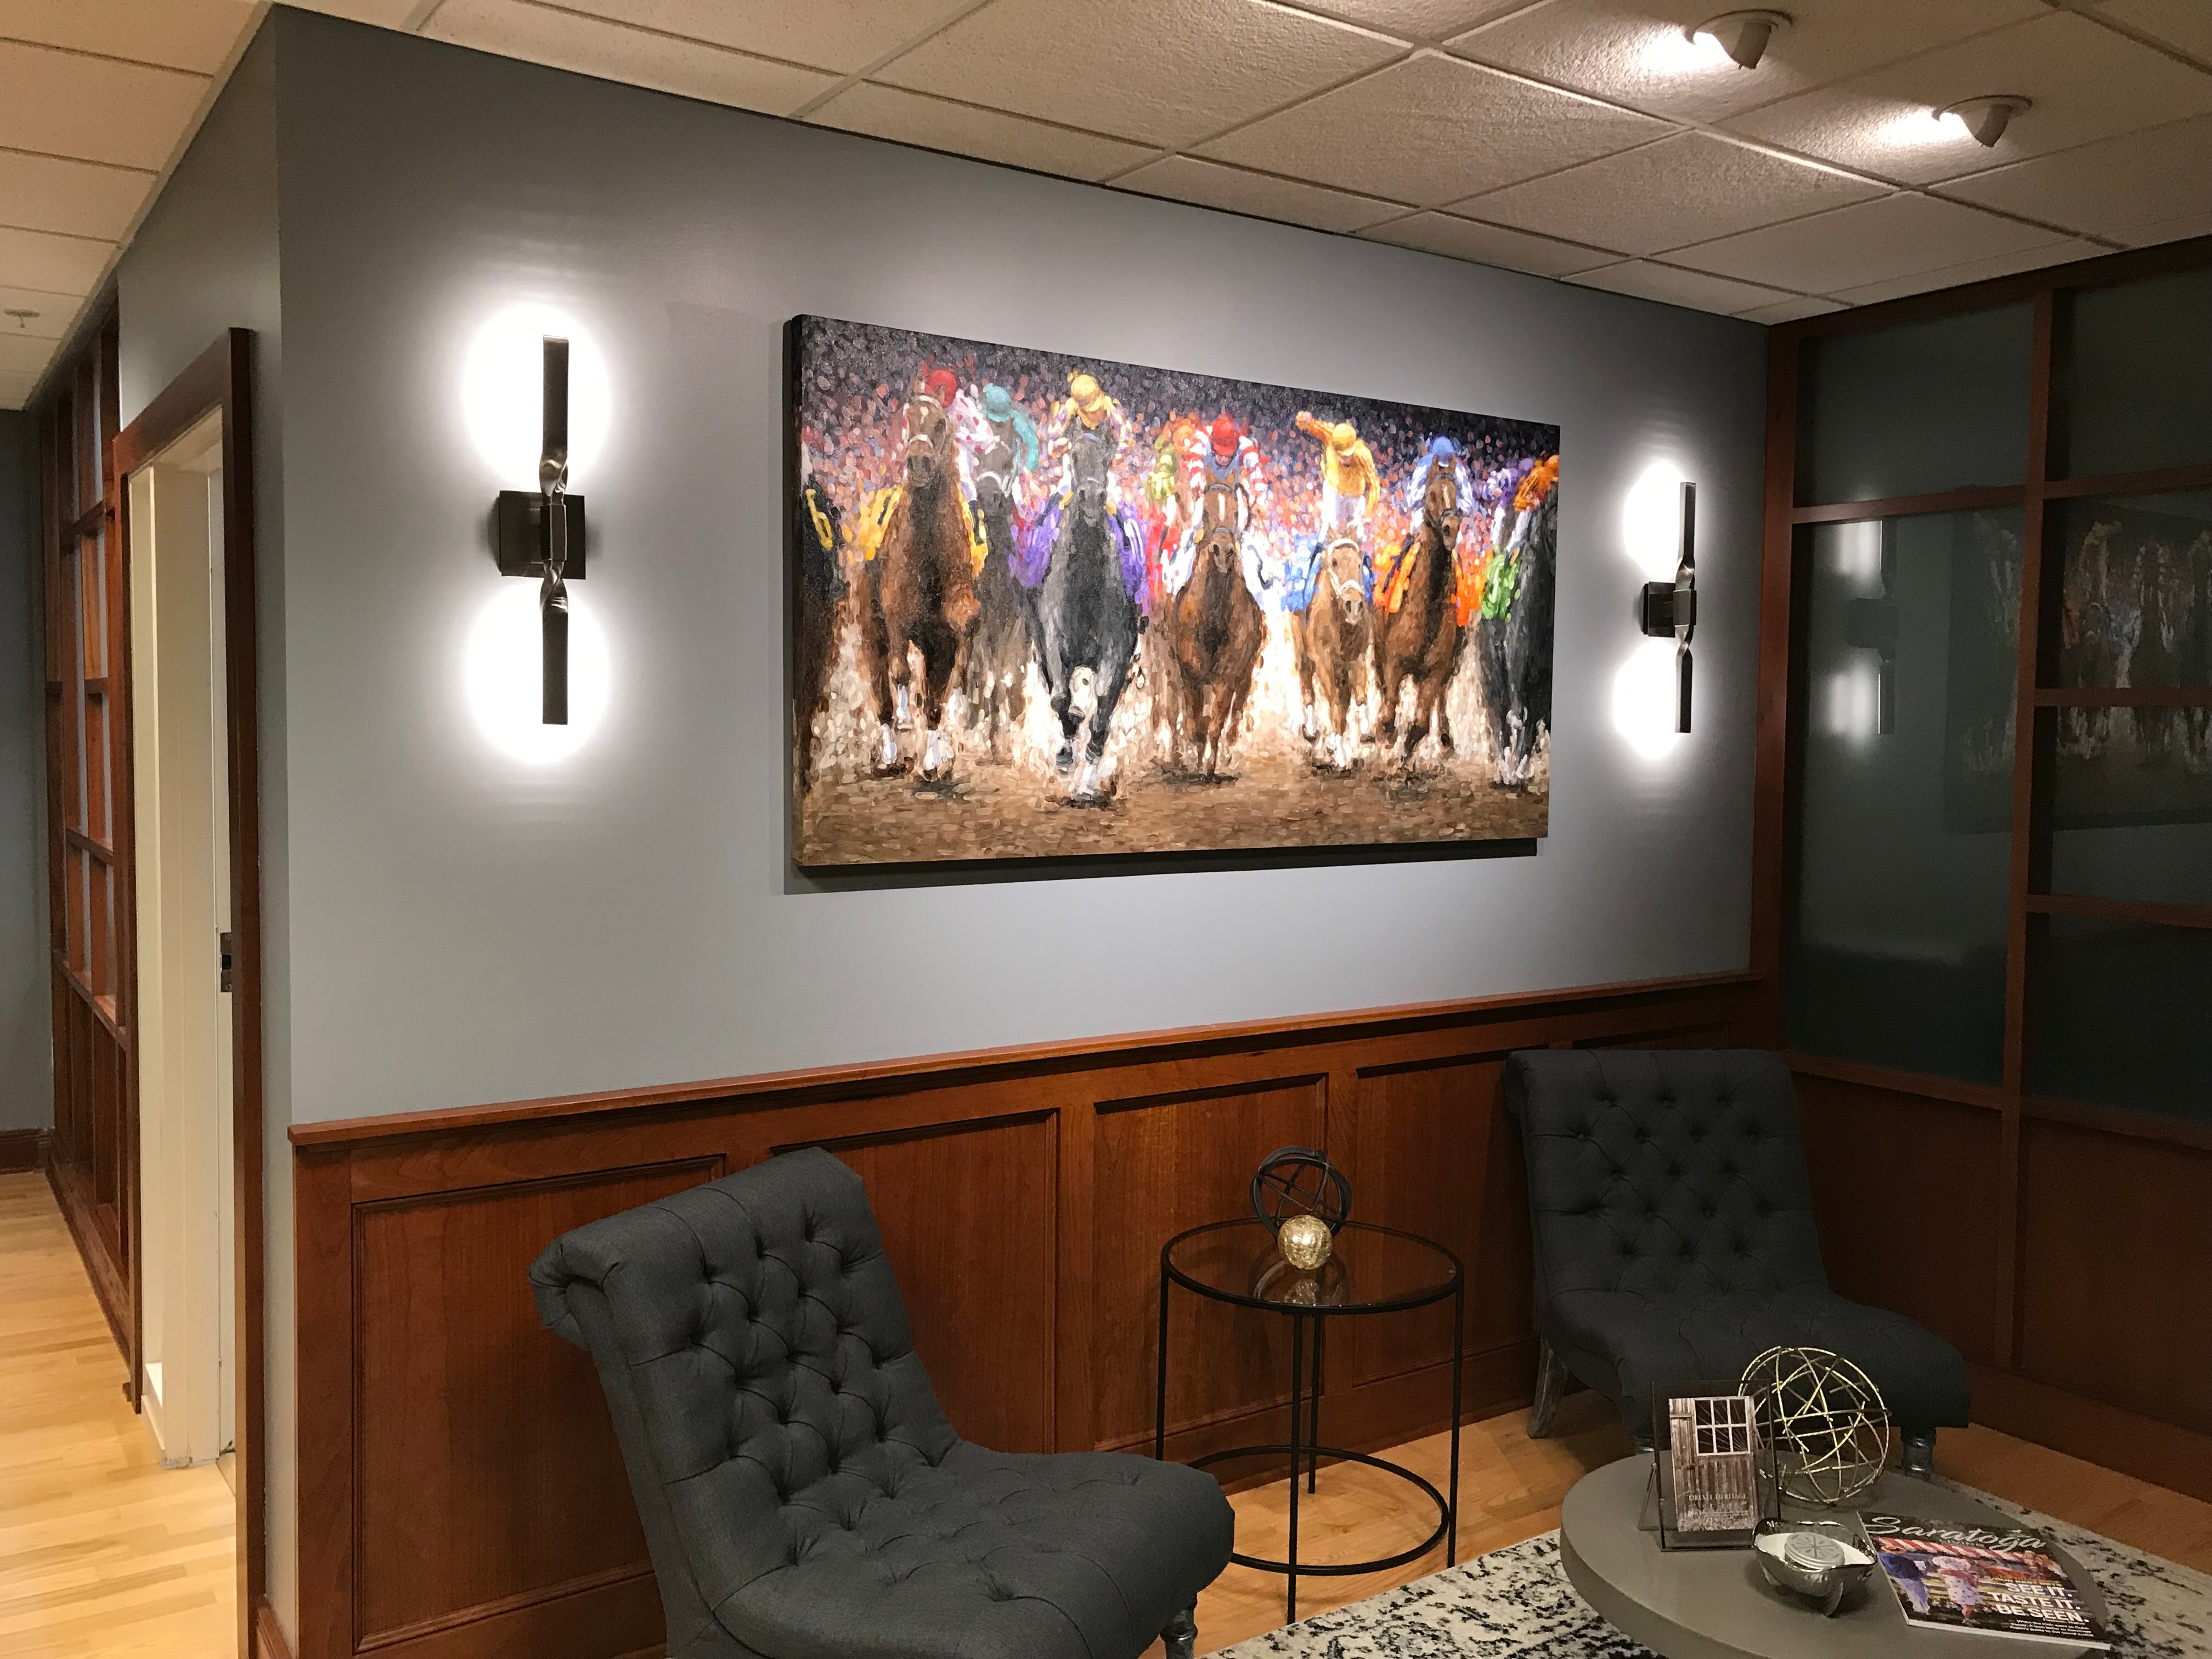 In a client's office, a striking painting by Tom Myott is displayed on a light grey wall above a wood-paneled wainscoting. The painting, illuminated by two modern wall sconces, depicts a lively scene of colorful horses in motion, characteristic of Myott's style. The office is furnished with two dark upholstered chairs and a round table with decorative objects, creating a sophisticated and inviting area for contemplation or conversation, with the artwork serving as a compelling centerpiece.